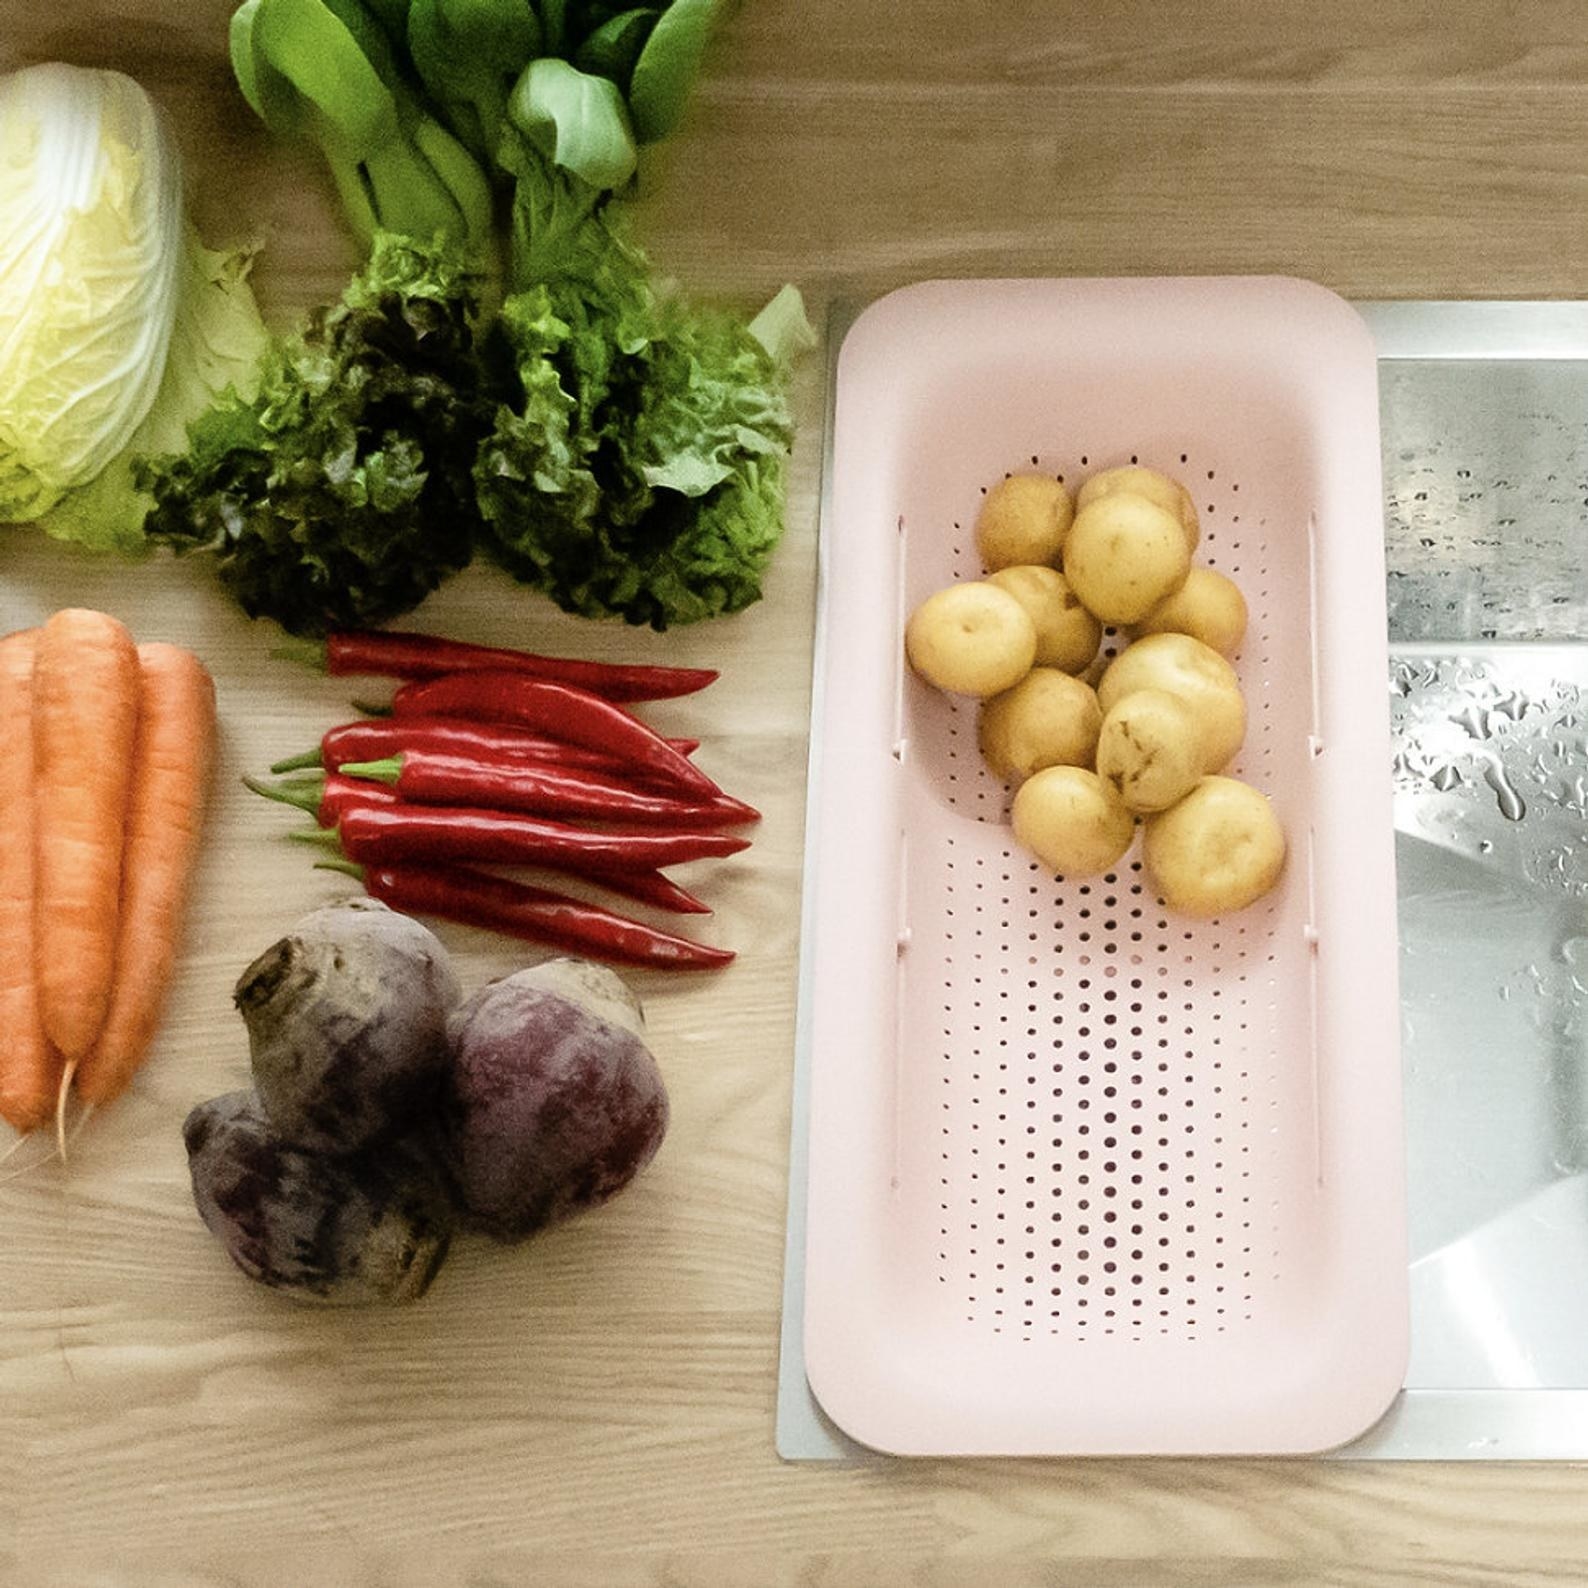 The strainer in pink expanded  to fit in a sink with potatoes in it and other vegetables next to it